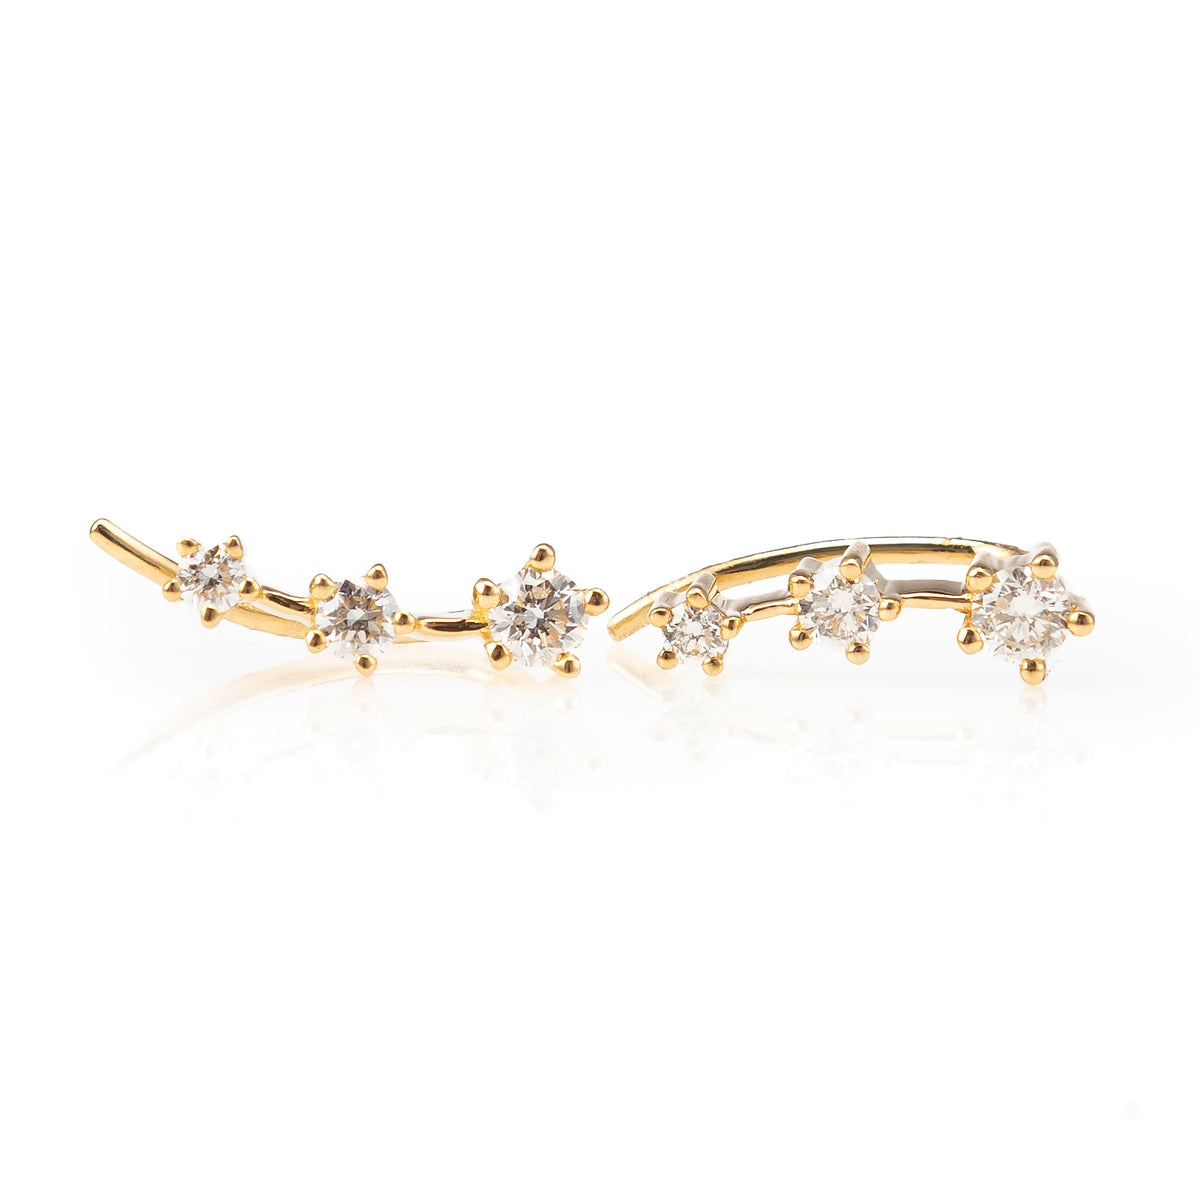 Petite Constellation Crawlers-Earrings-Zofia Day Co.